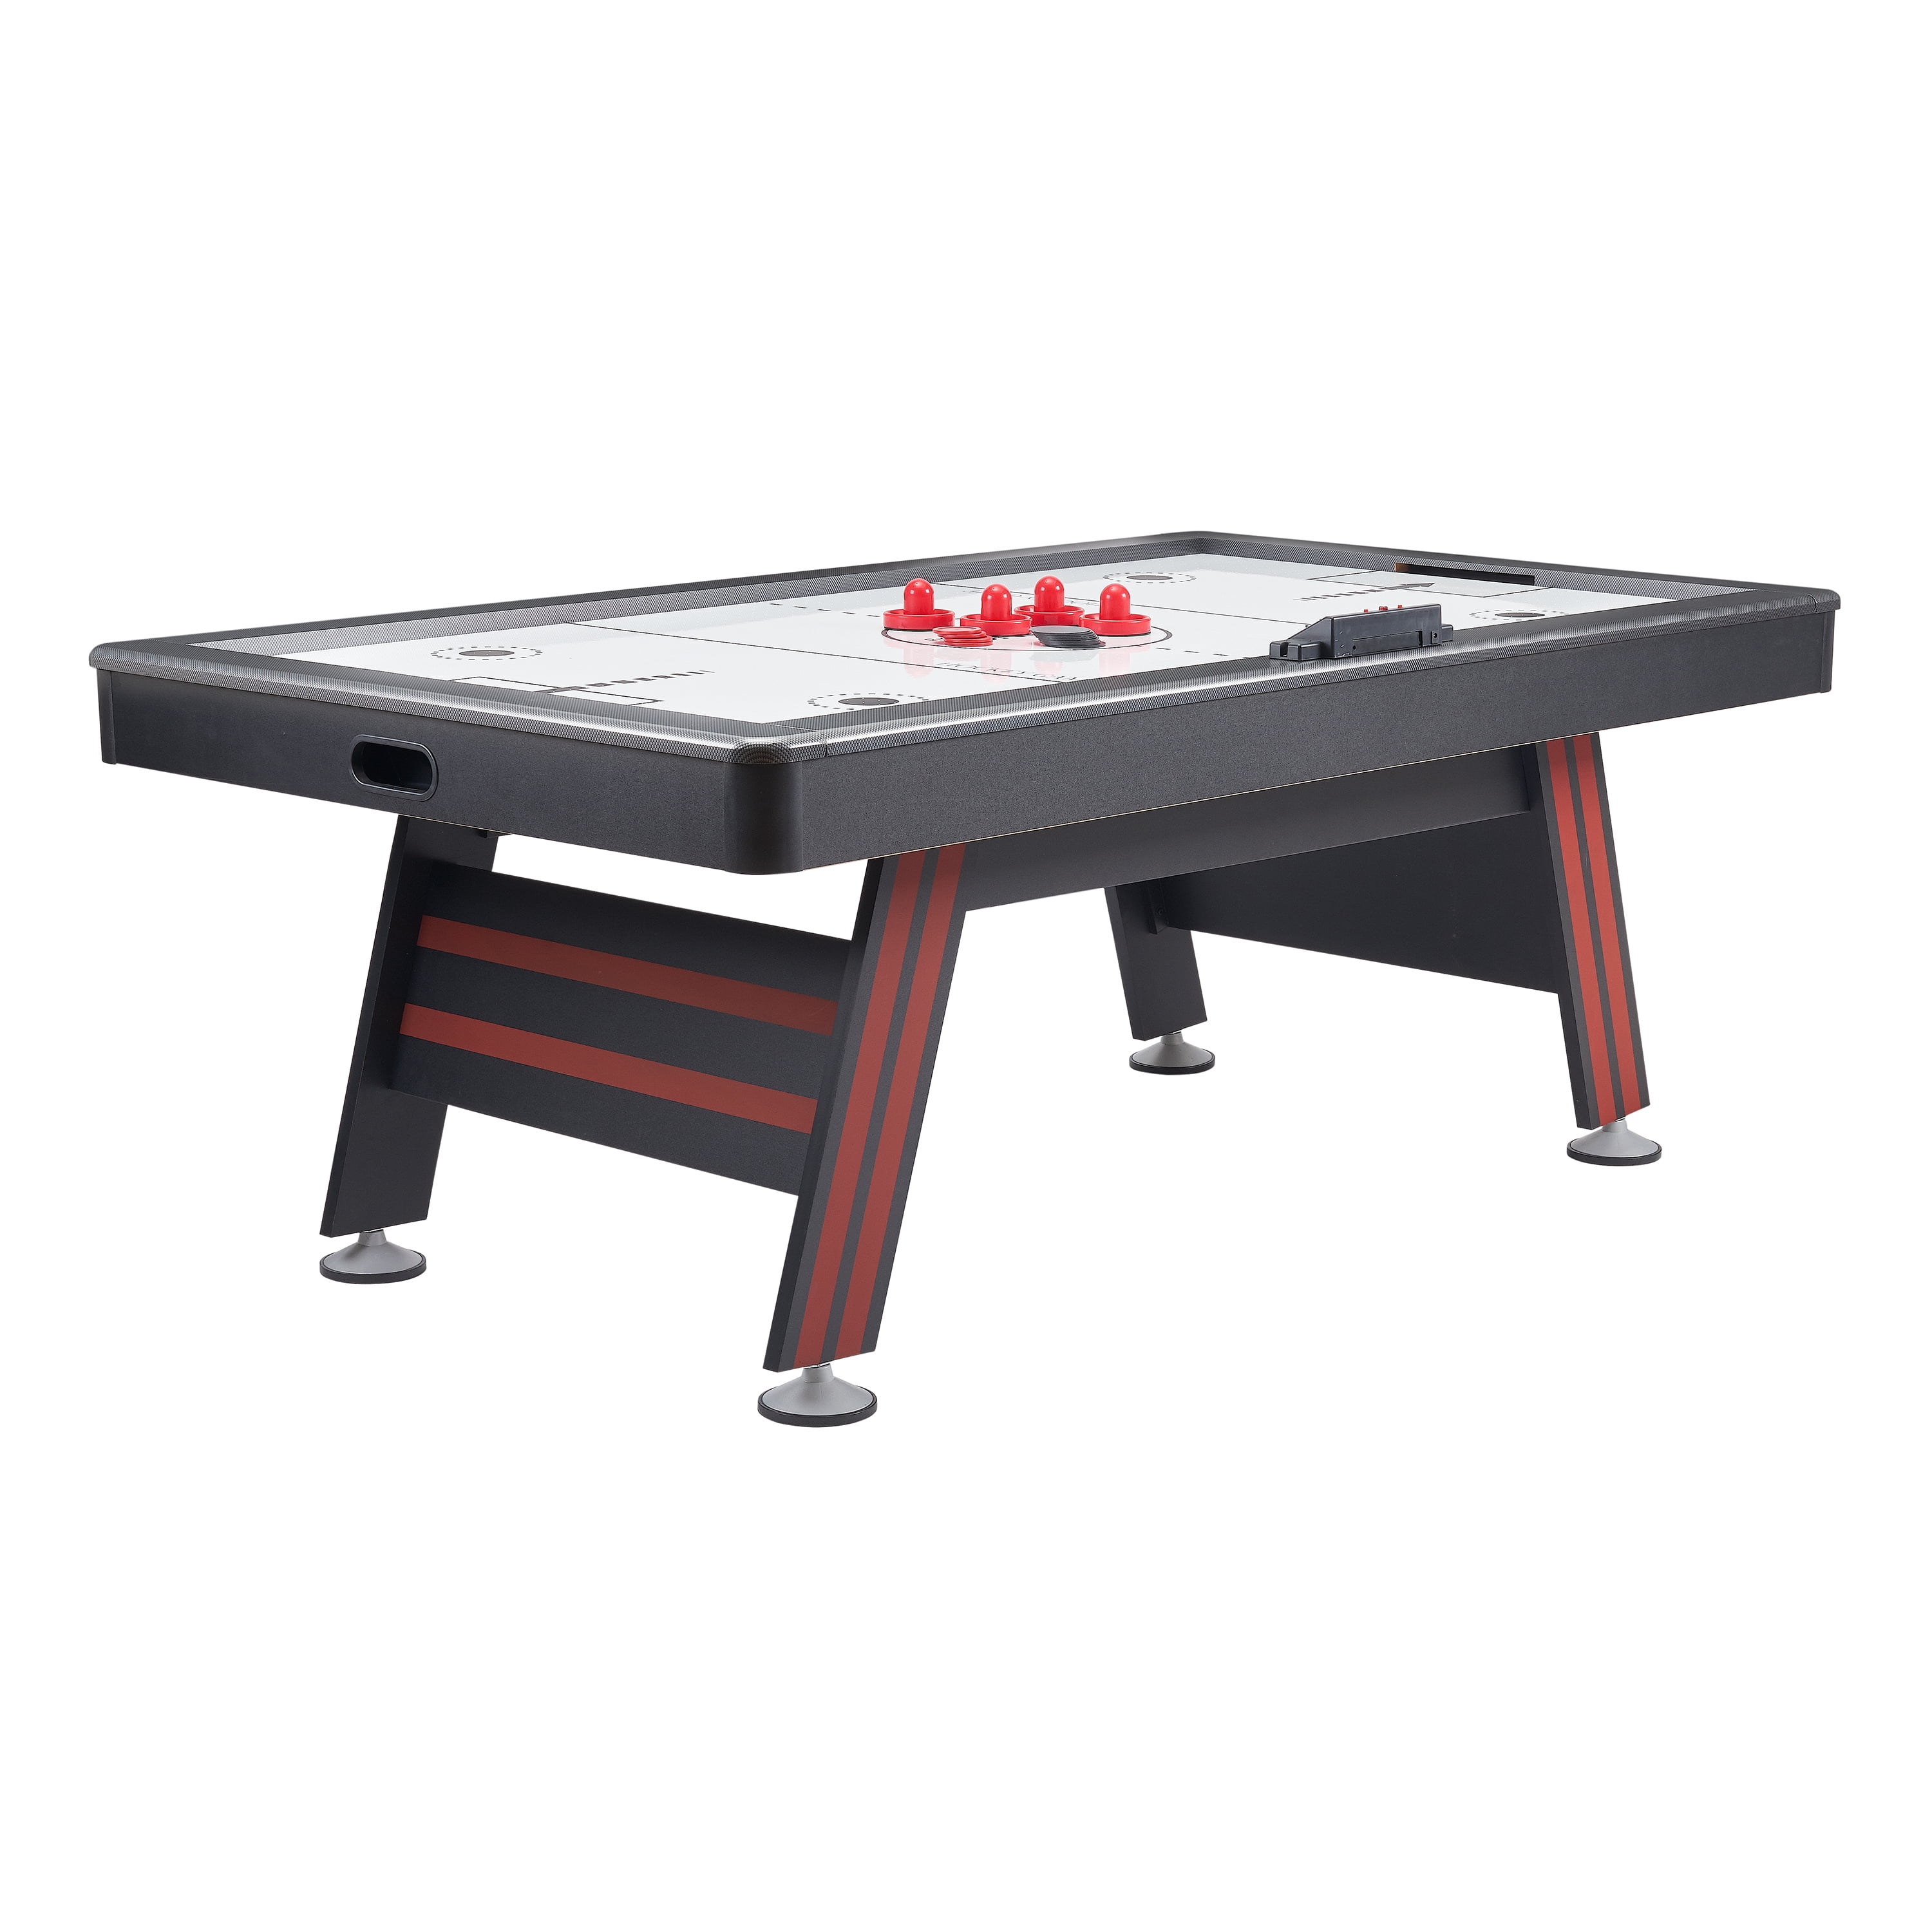 Airzone Air Hockey Table with High End Blower, 84/